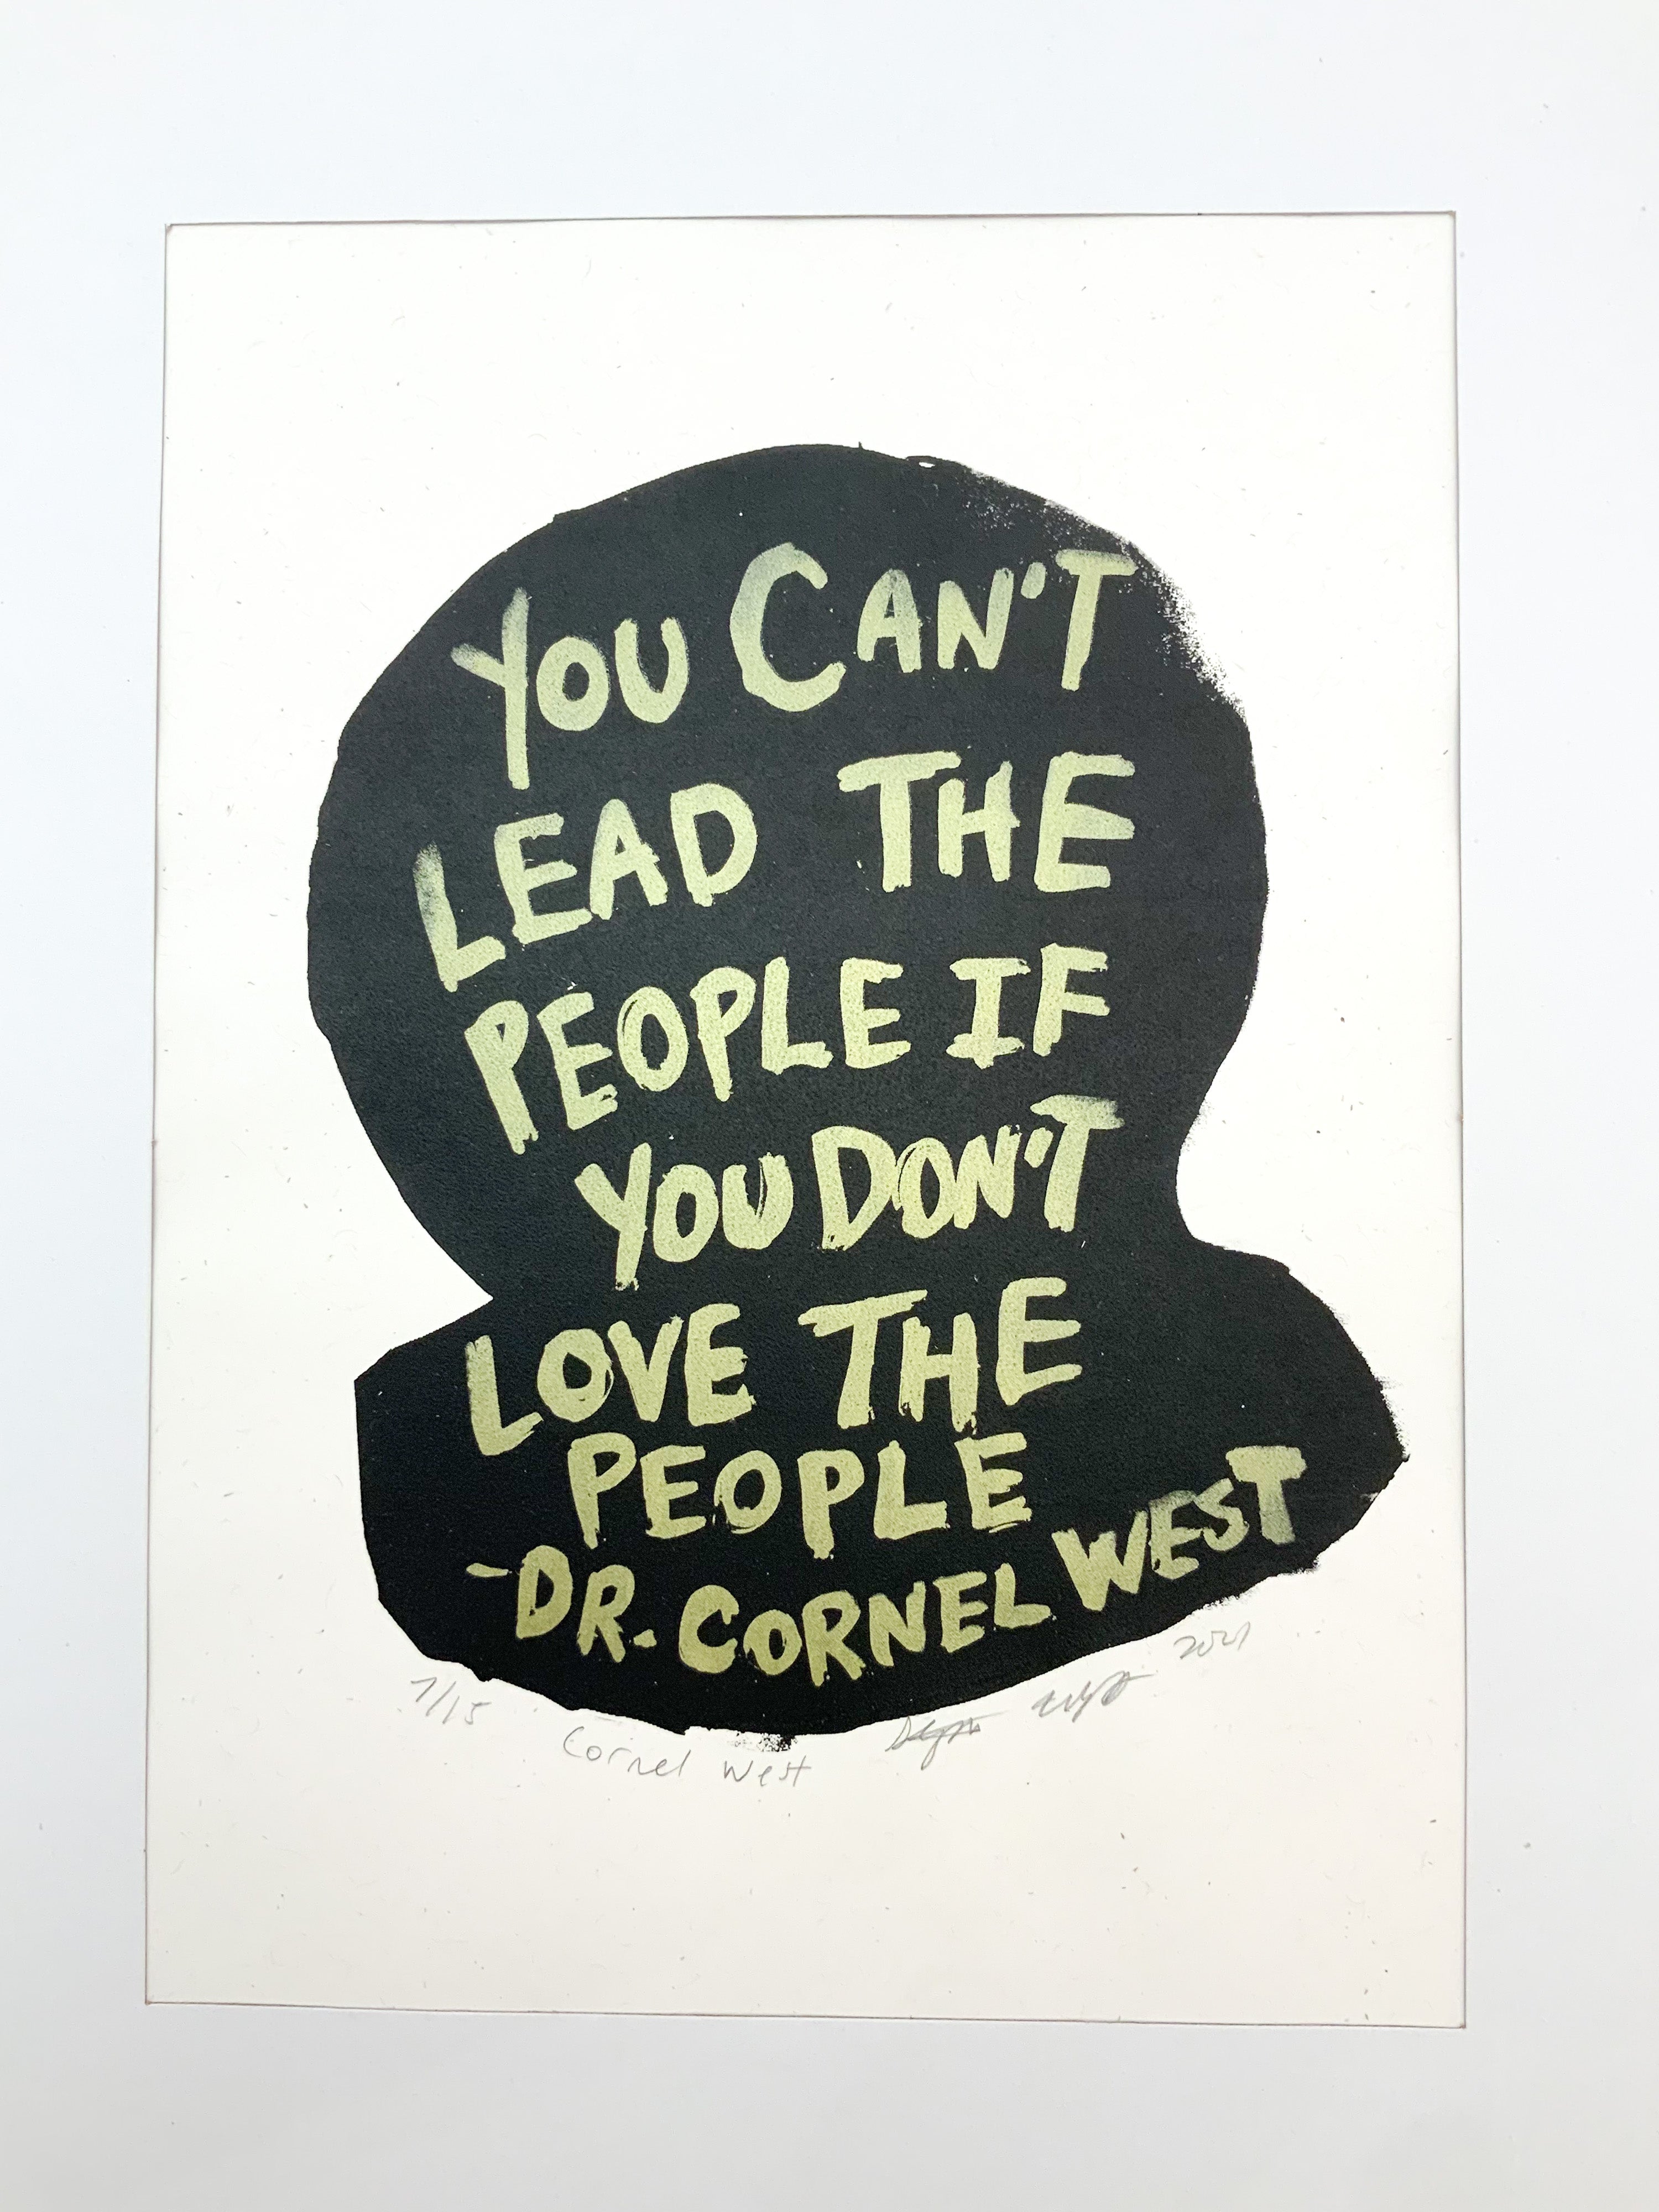 CORNEL WEST PAINTED QUOTE PRINT